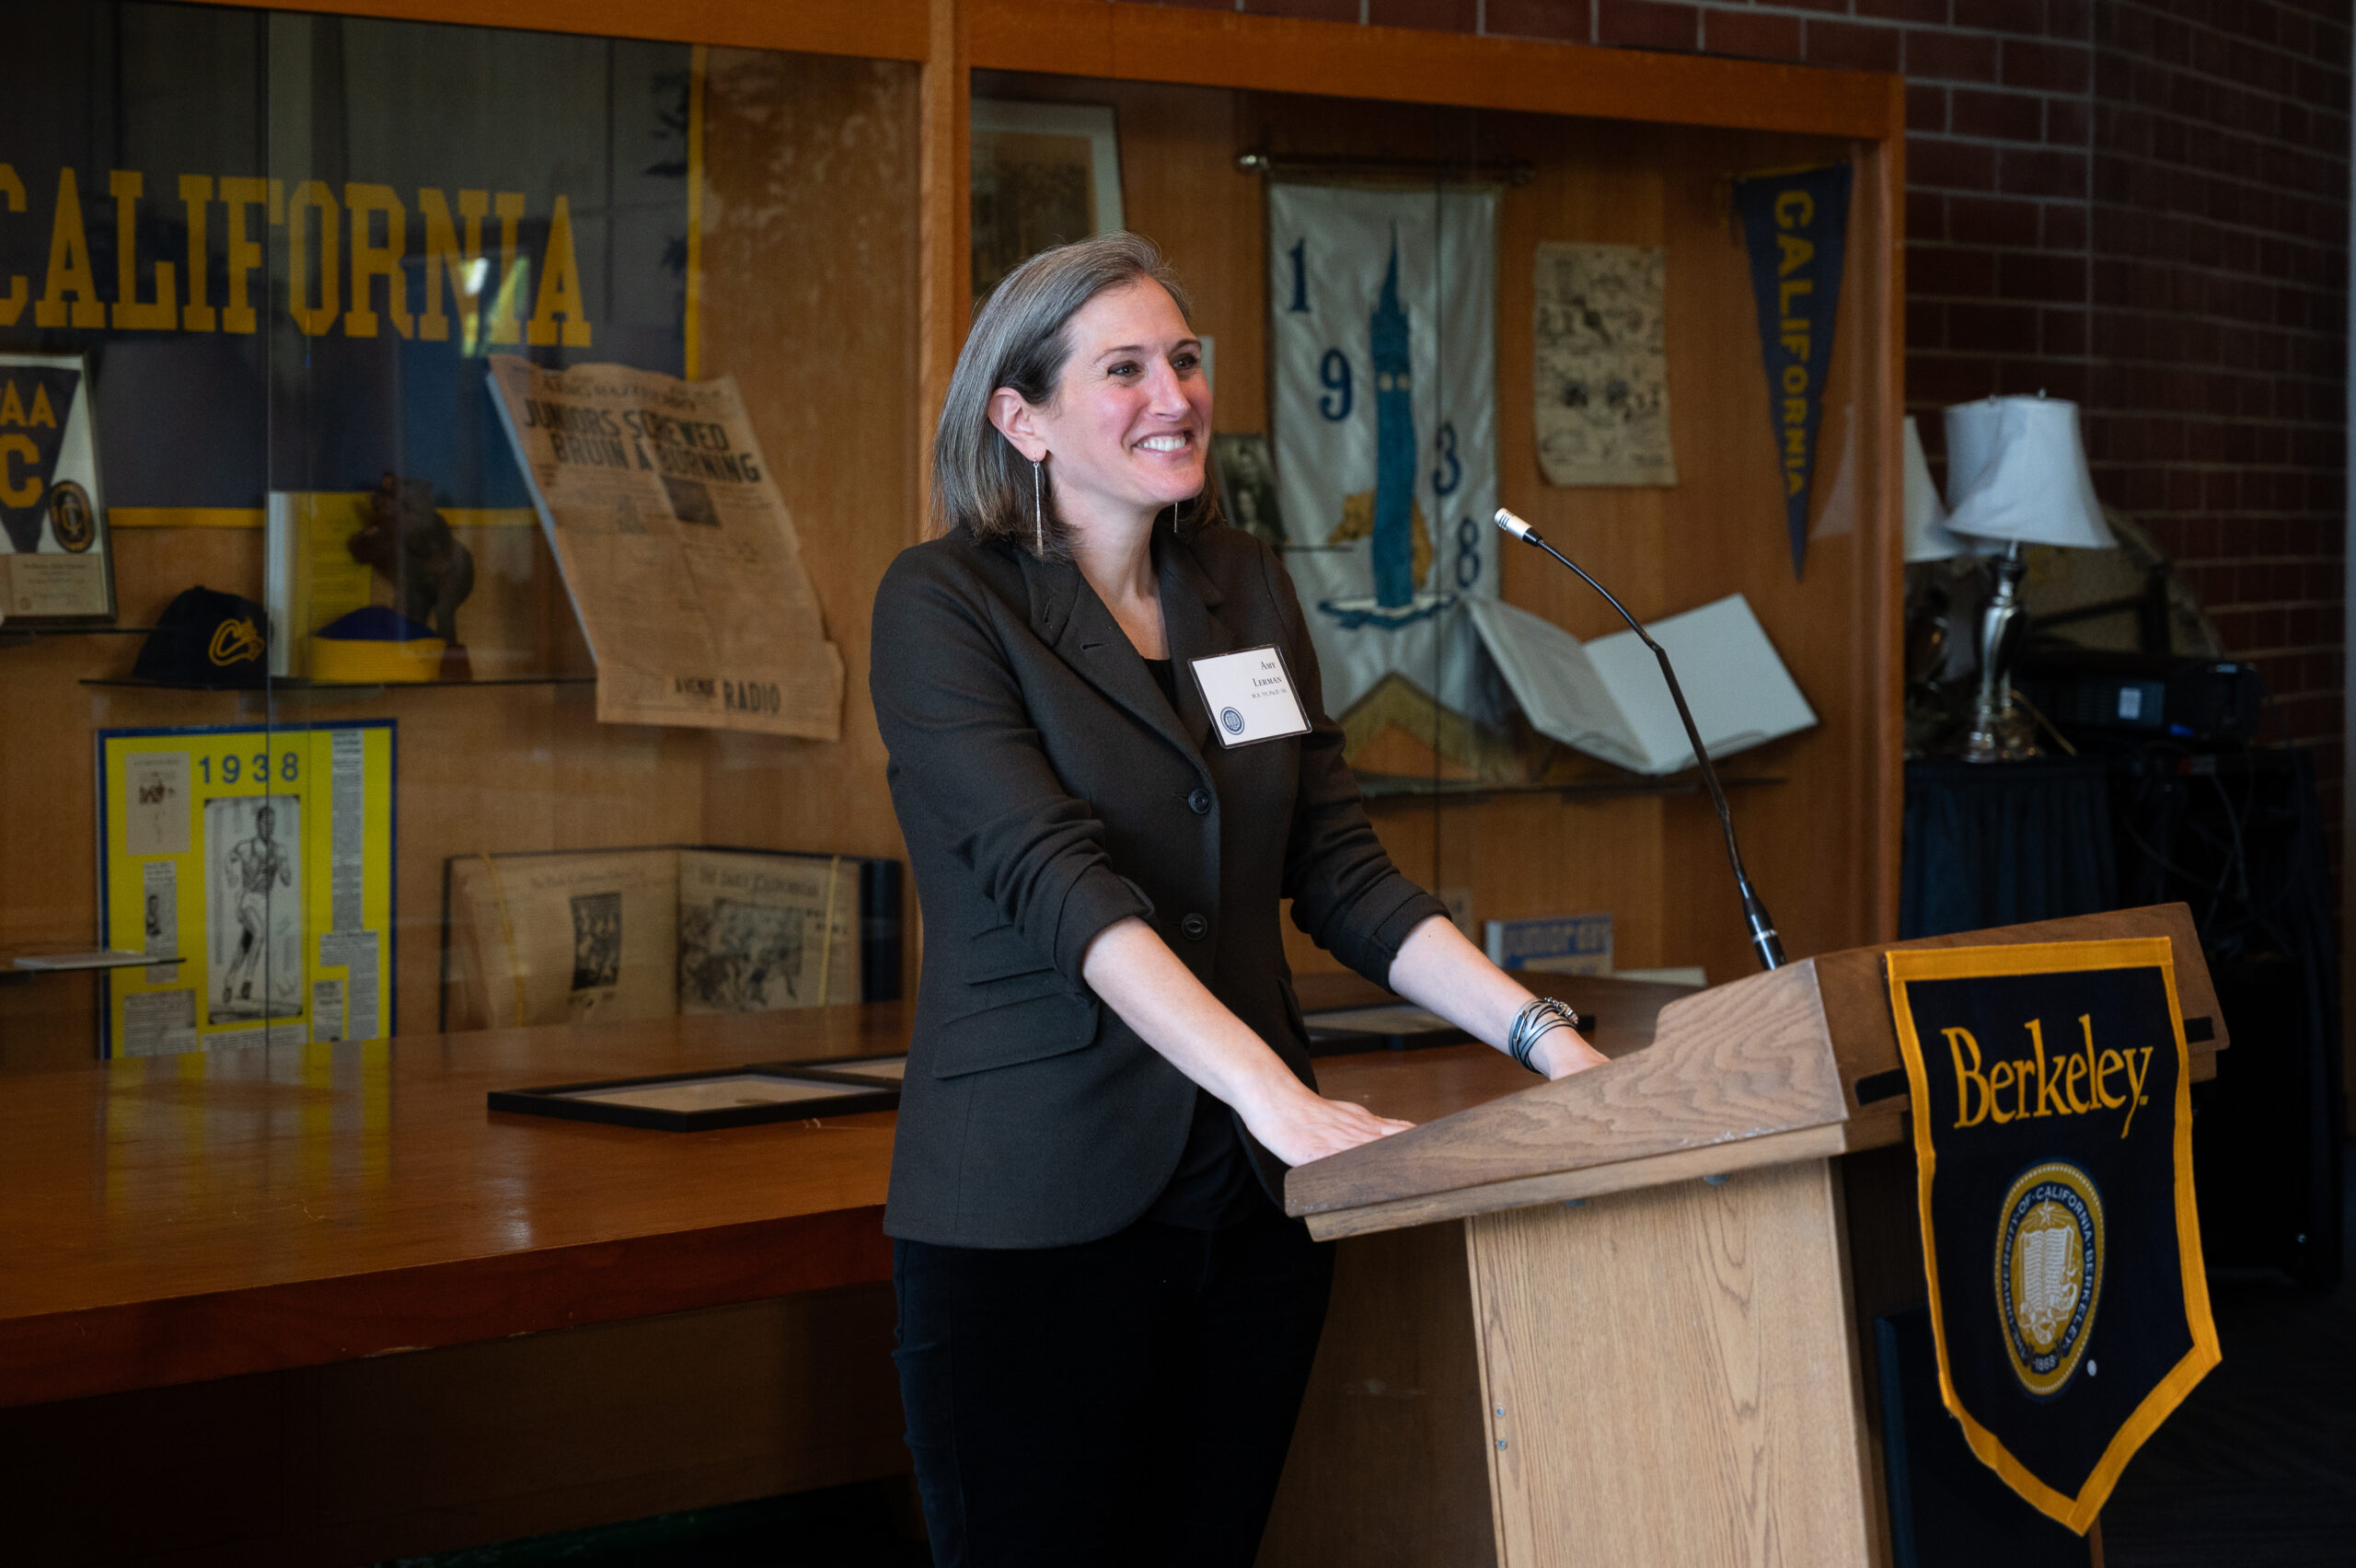 Possibility Lab’s Executive Director Amy E. Lerman Honored with UC Berkeley Chancellor’s Public Service Award